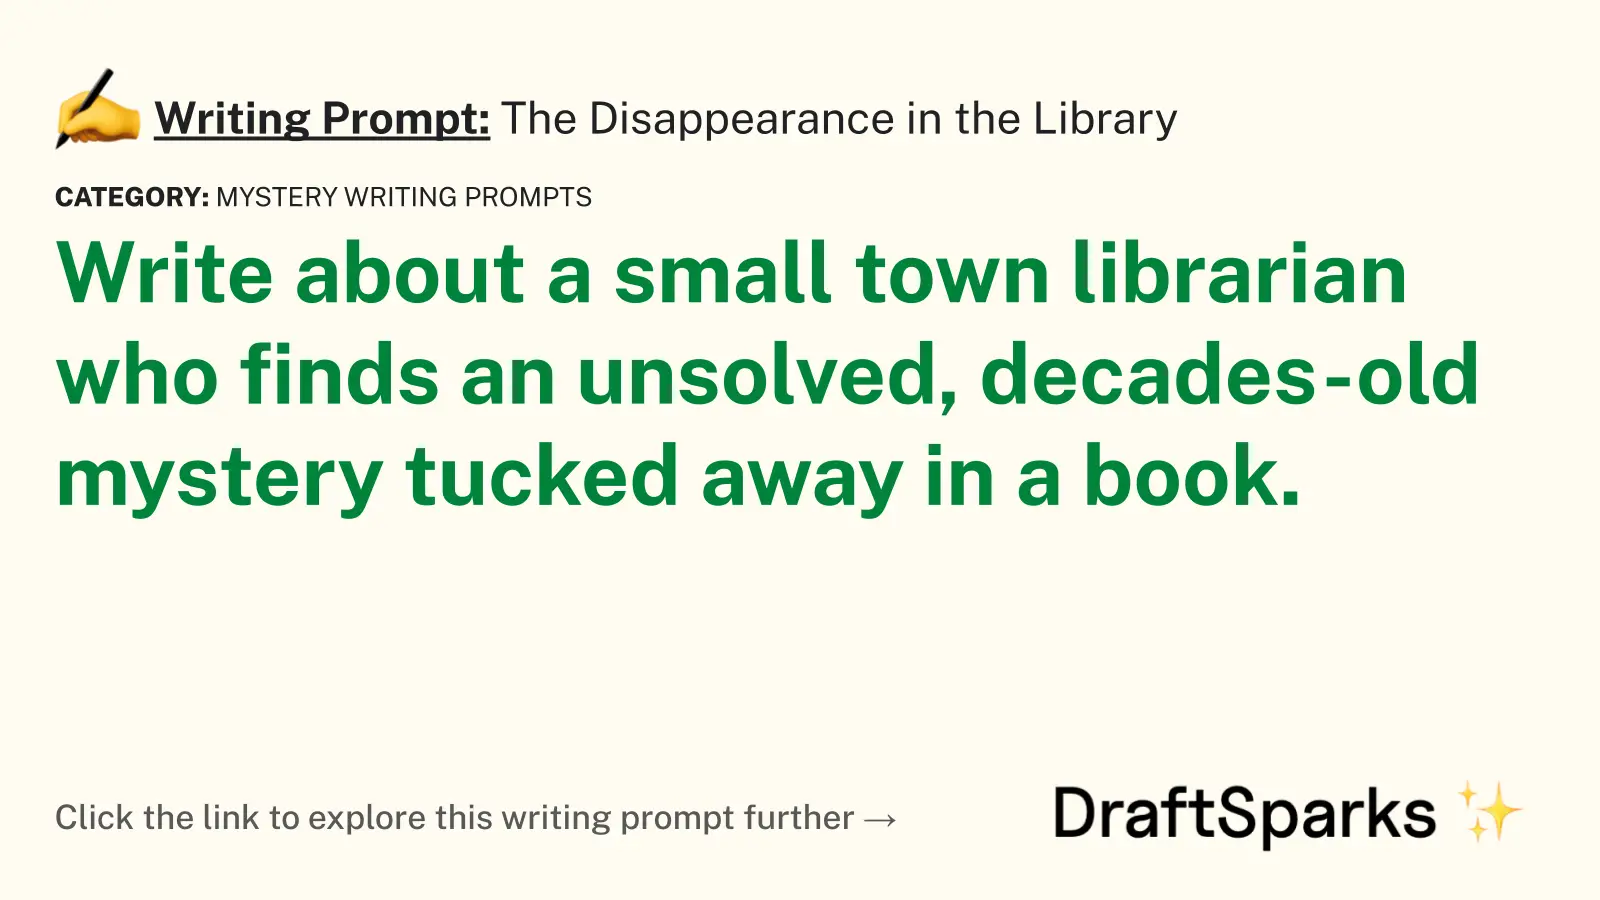 The Disappearance in the Library